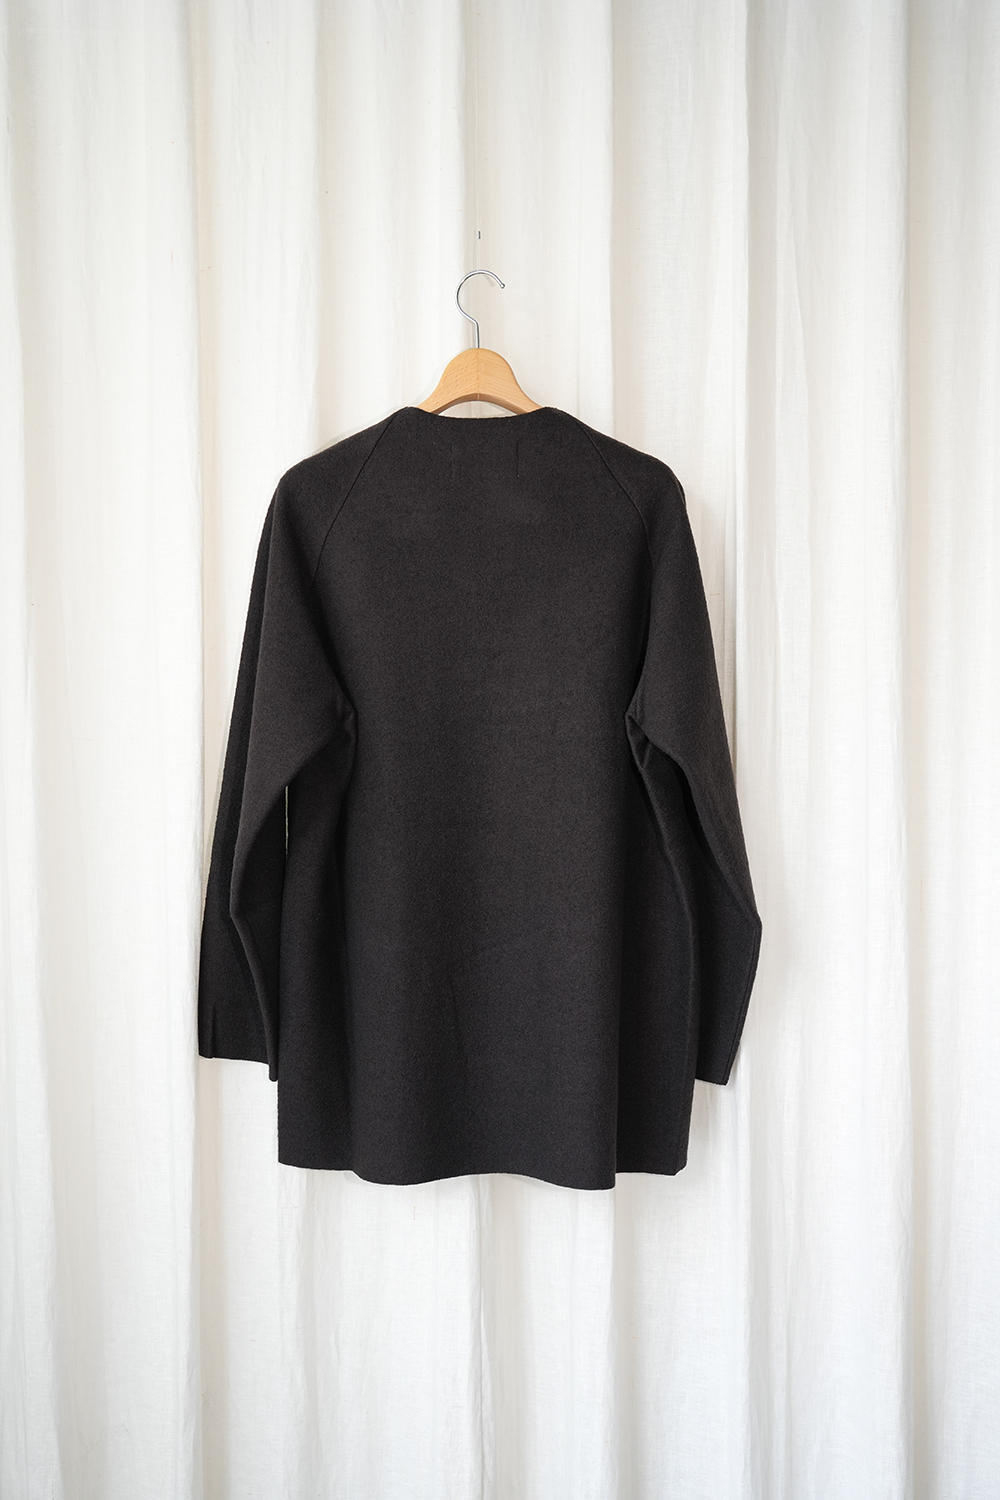 WOOL RING JERSEY Crew Neck Pullover | ANOTHER LOUNGE